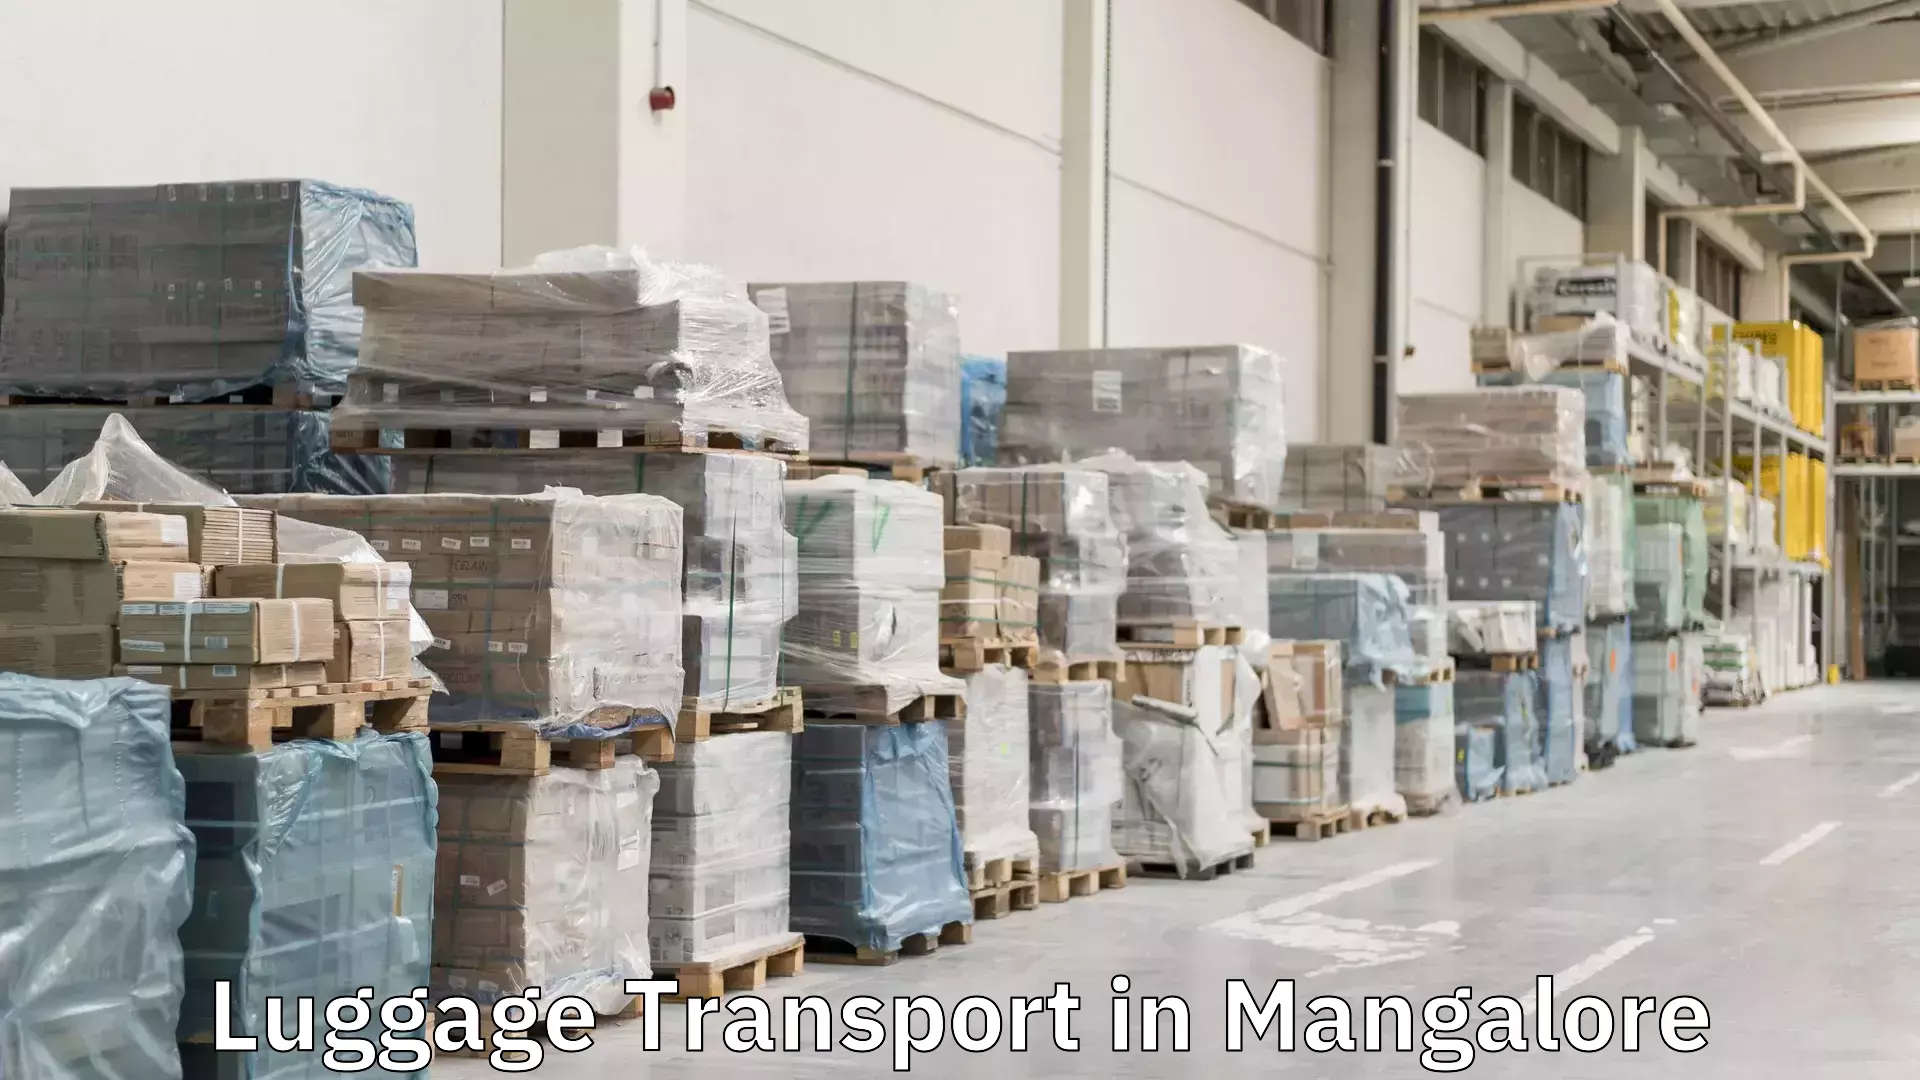 Luggage transport deals in Mangalore